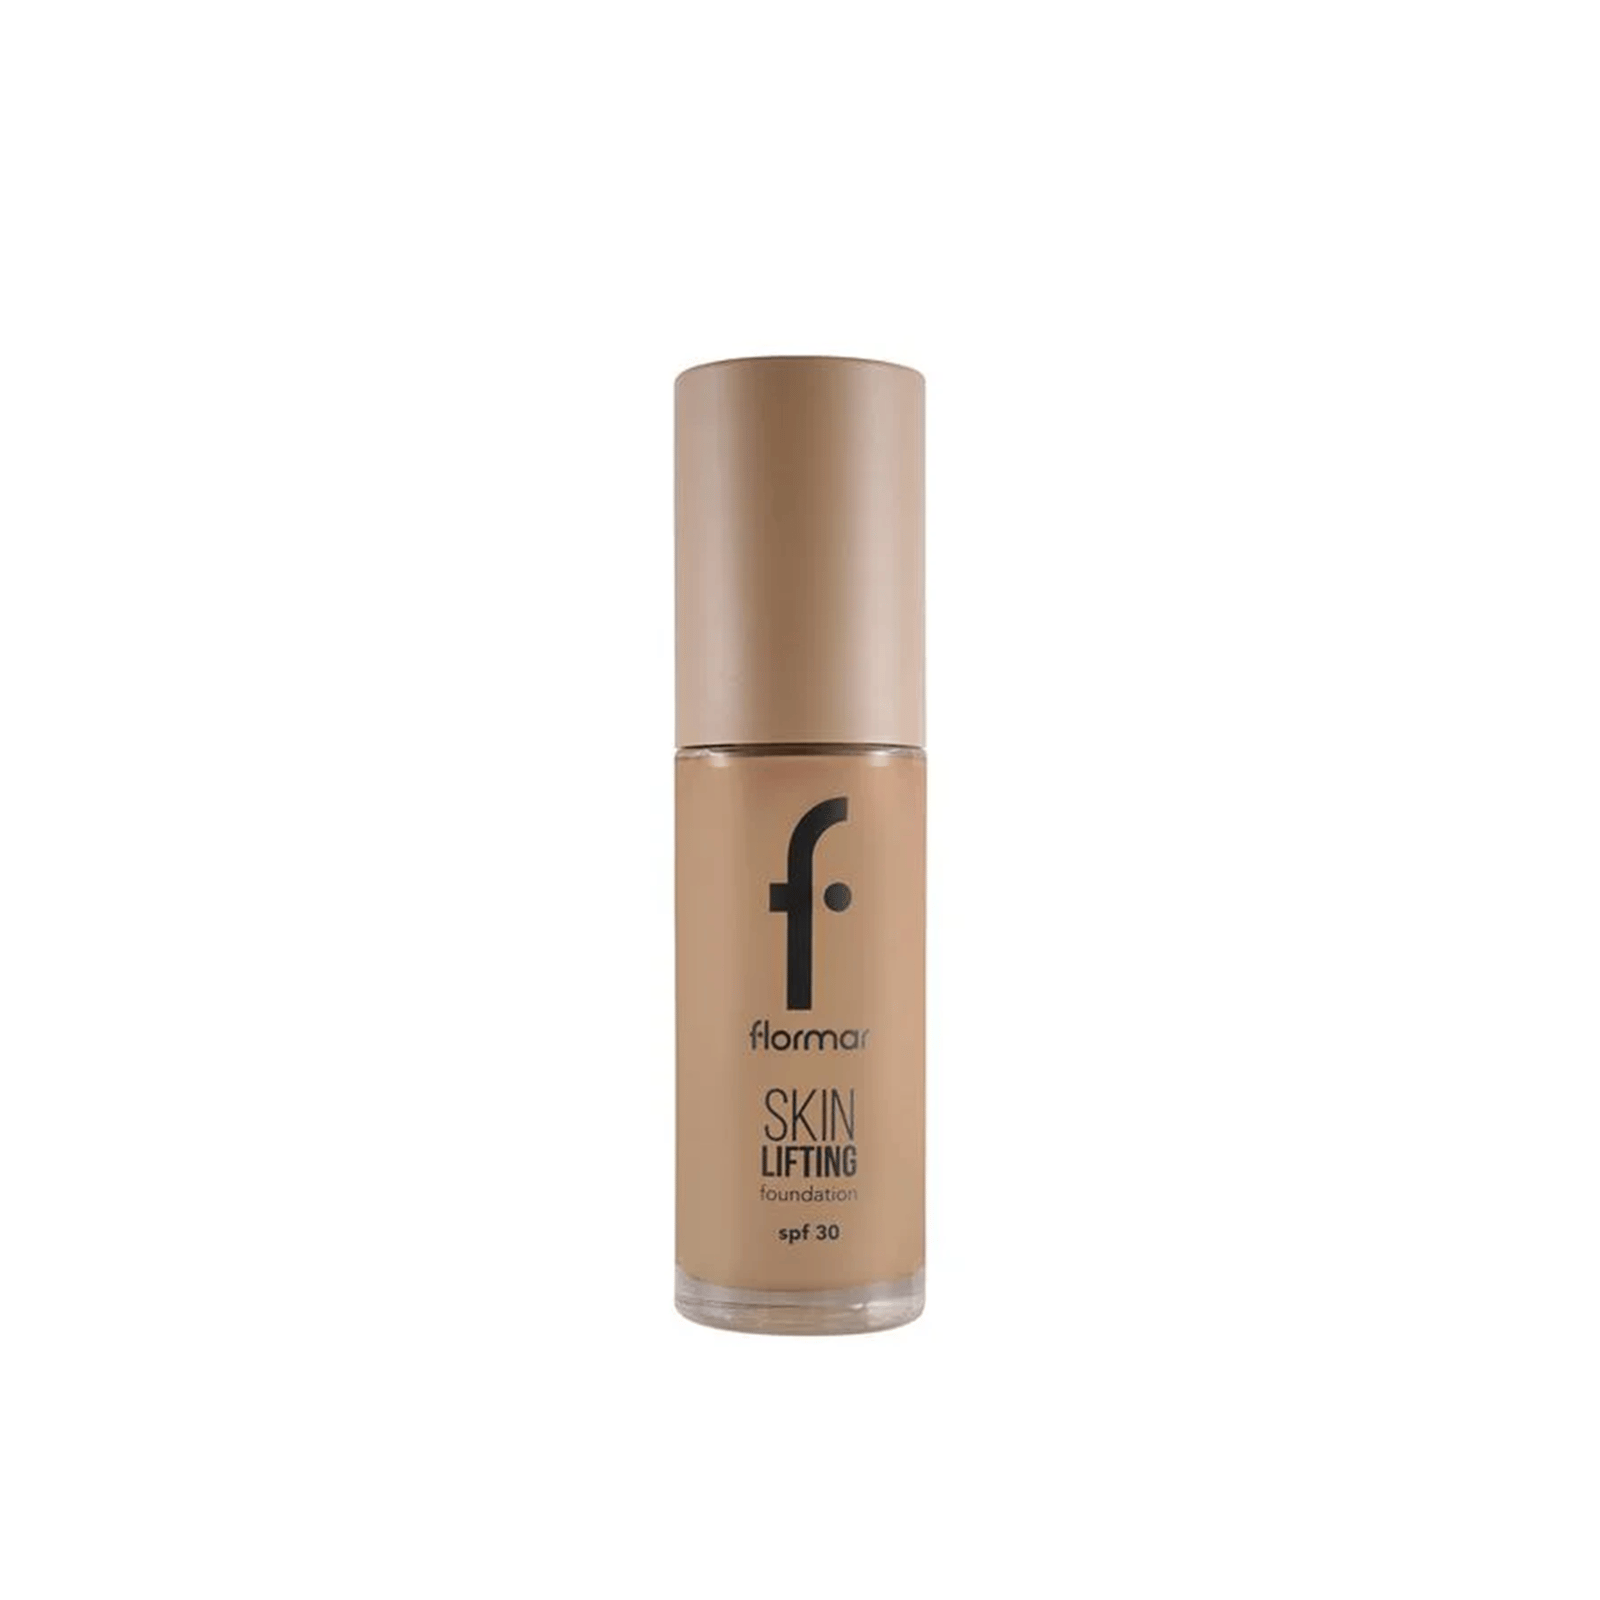 https://static.beautytocare.com/cdn-cgi/image/width=1600,height=1600,f=auto/media/catalog/product//f/l/flormar-skin-lifting-foundation-spf30-130-spiced-sand-30ml.png